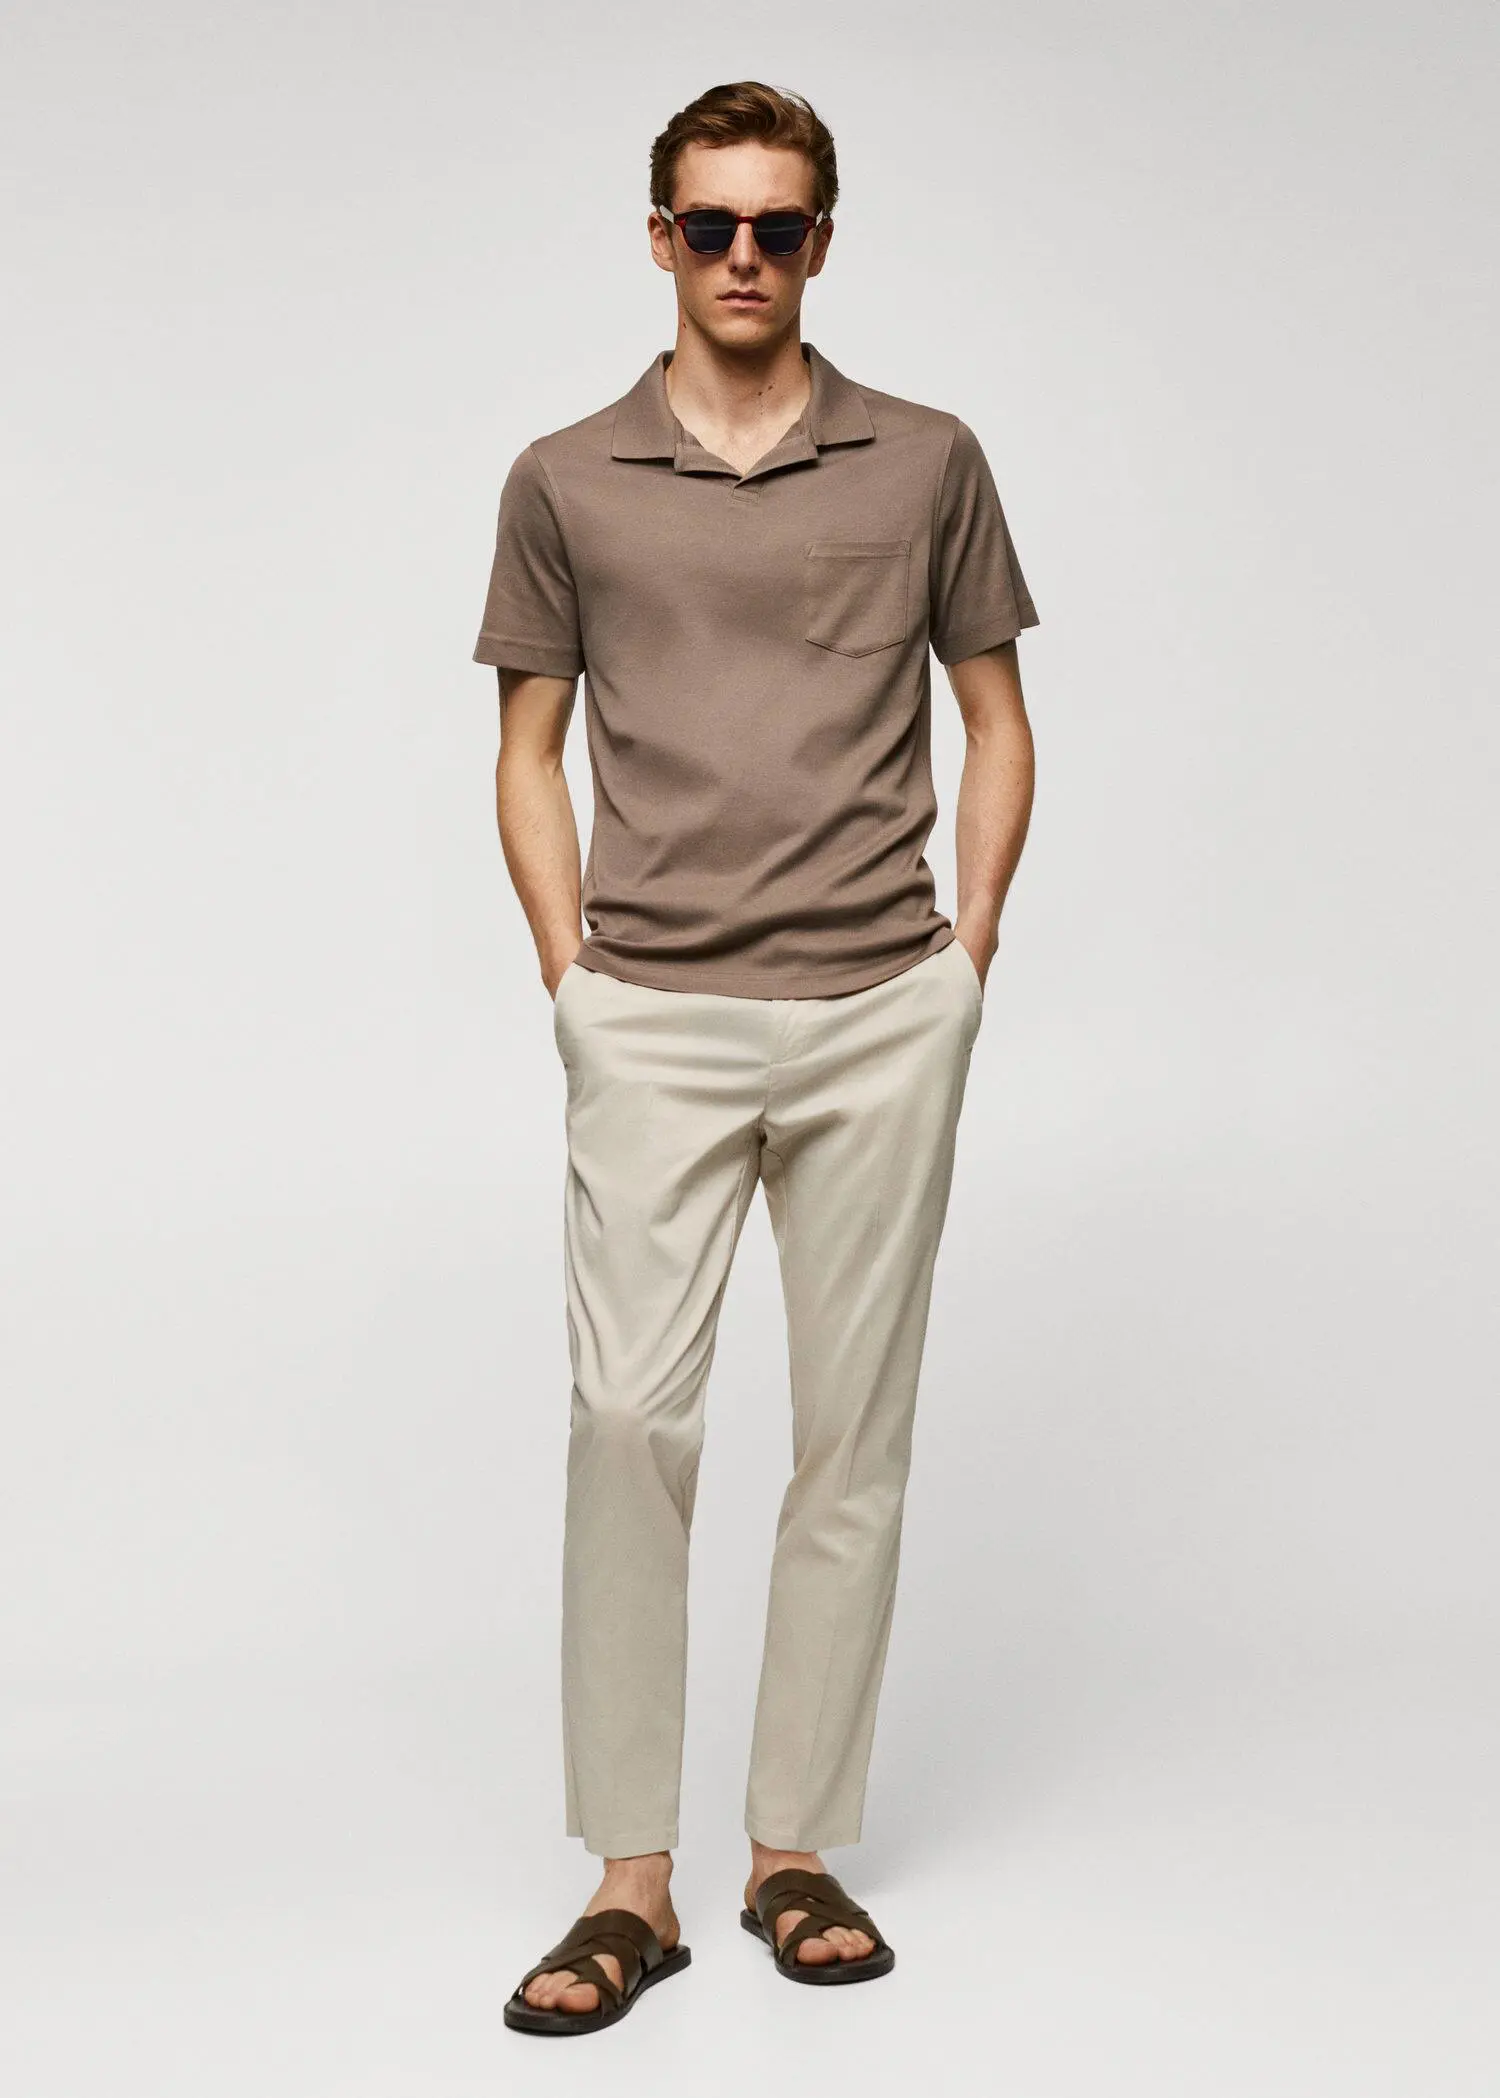 Mango 100% cotton polo shirt with pocket. a man in a brown shirt and beige pants. 